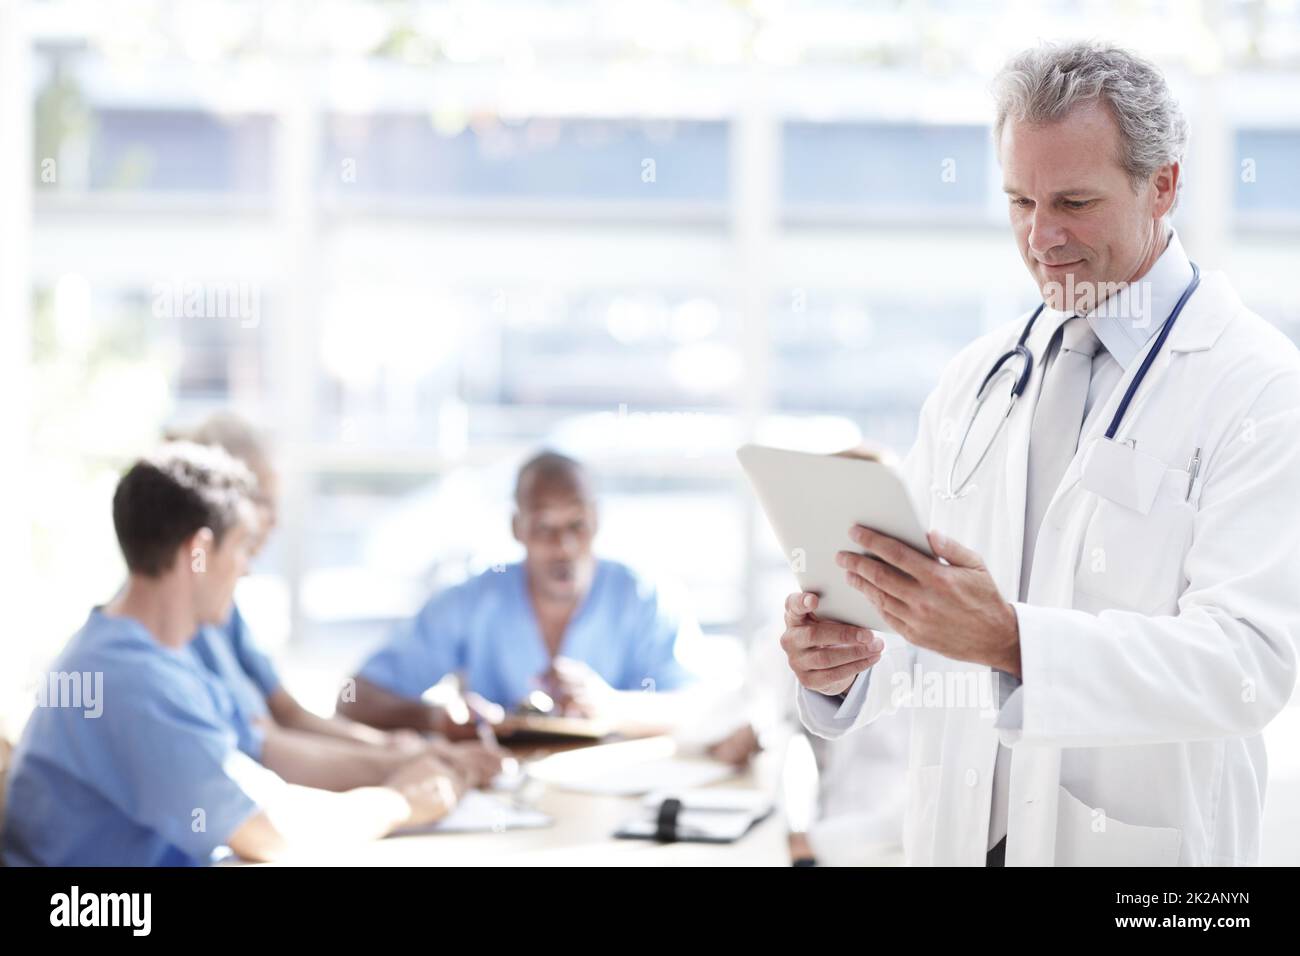 Doing his daily check. A senior doctor holding a touchpad with colleagues sitting in the background. Stock Photo